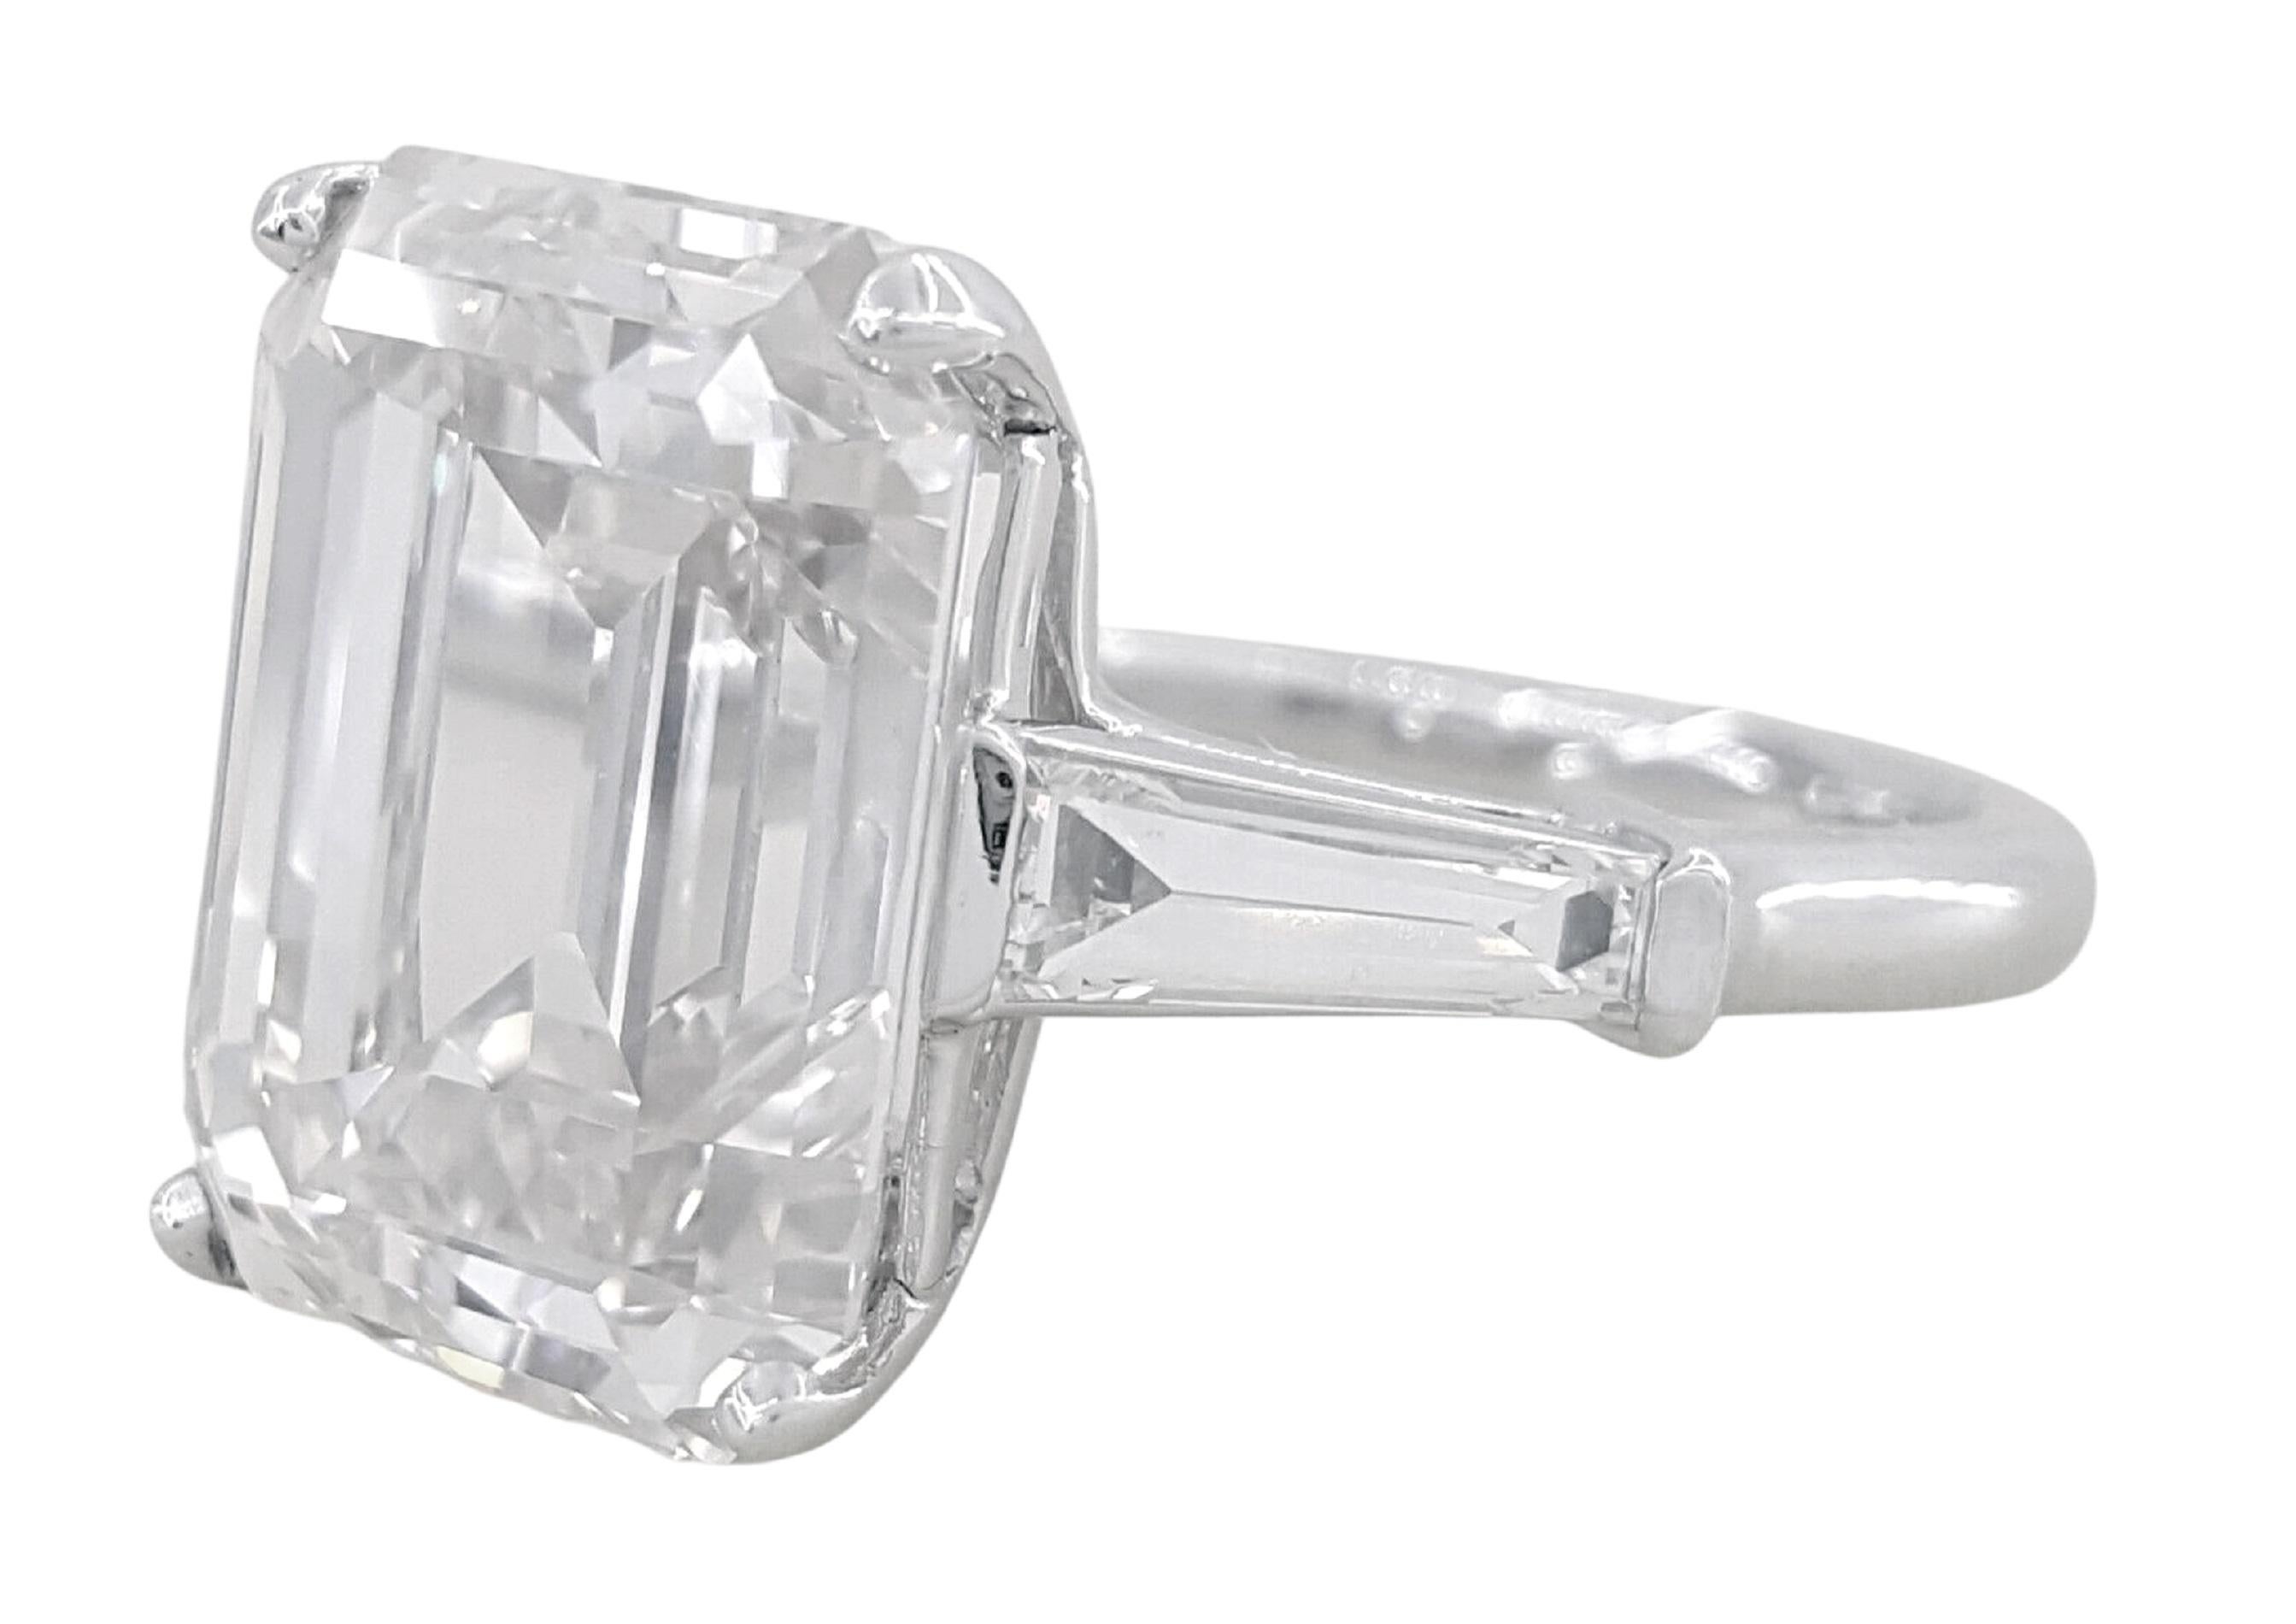 Antinori di Sanpietro offers this amazing 8.30 carats, vs1 in clarity, and a premium I color because the stone faces extremely white! like an H color!

Excellent Polish
Excellent Symmetry
None Fluorescence 

